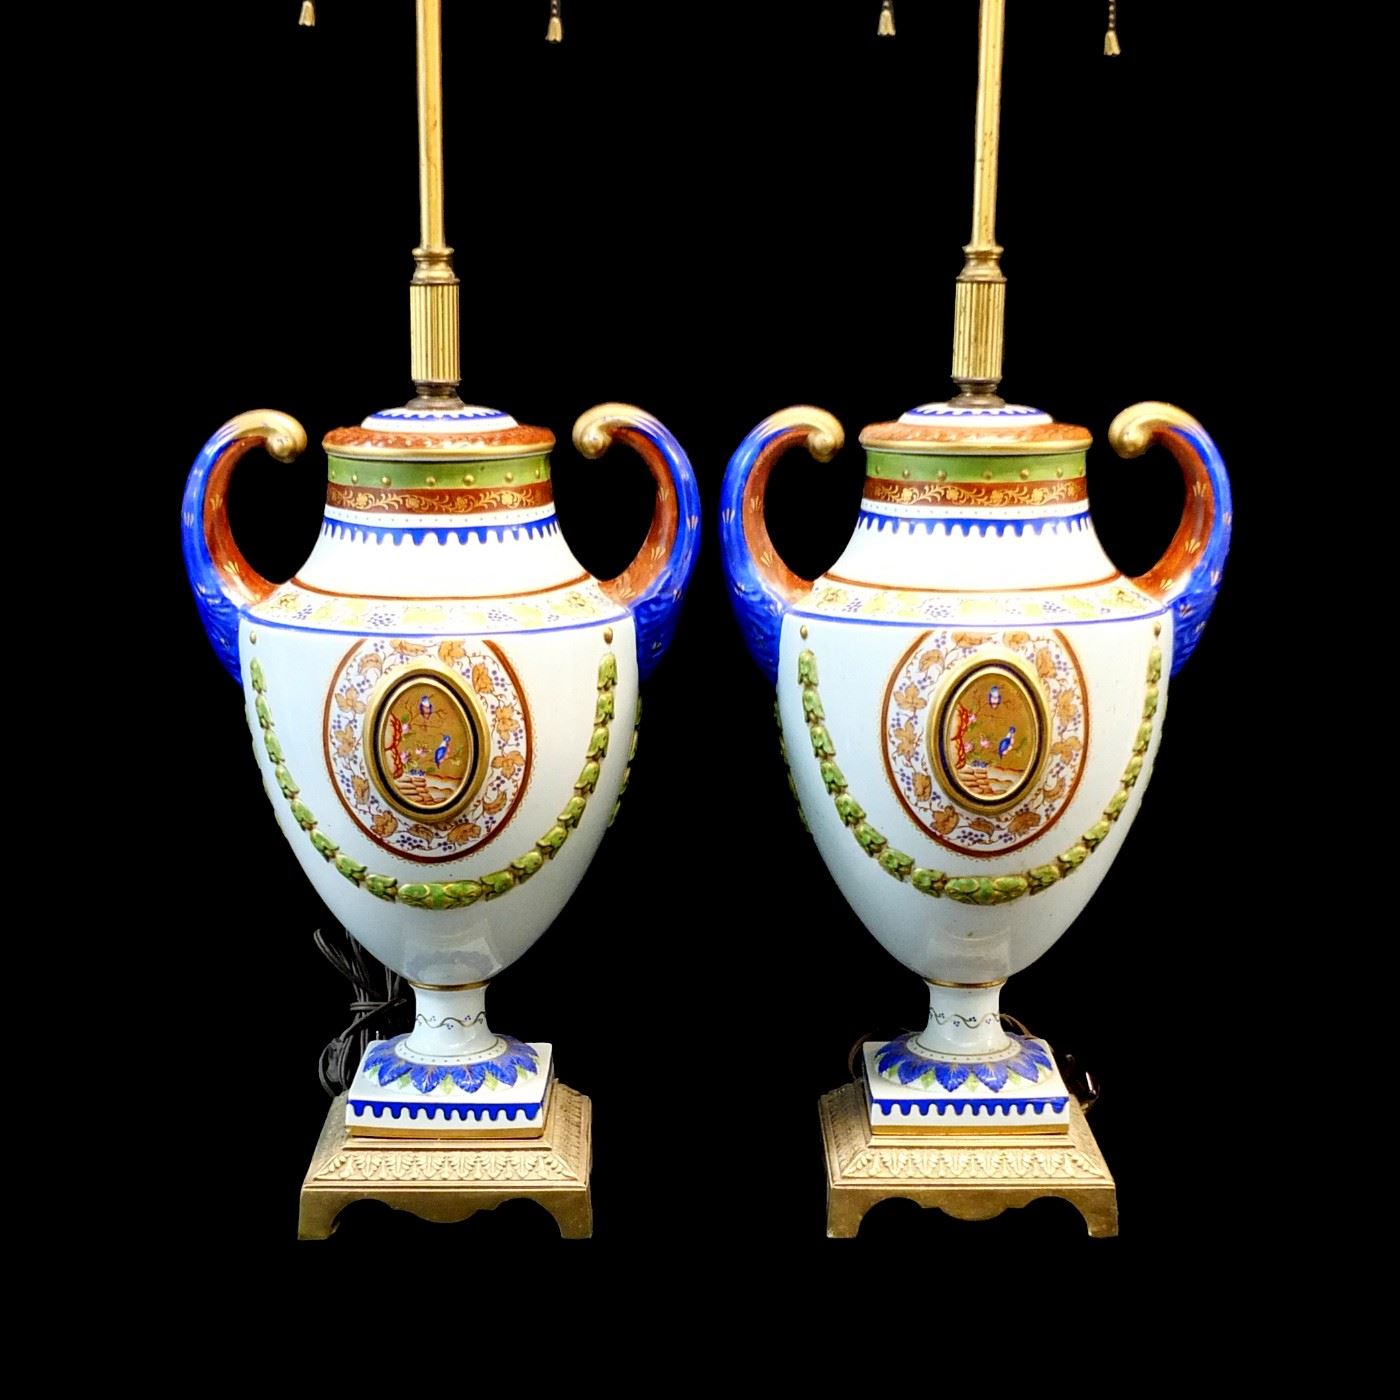 Pair of Chinese export pistol lamps